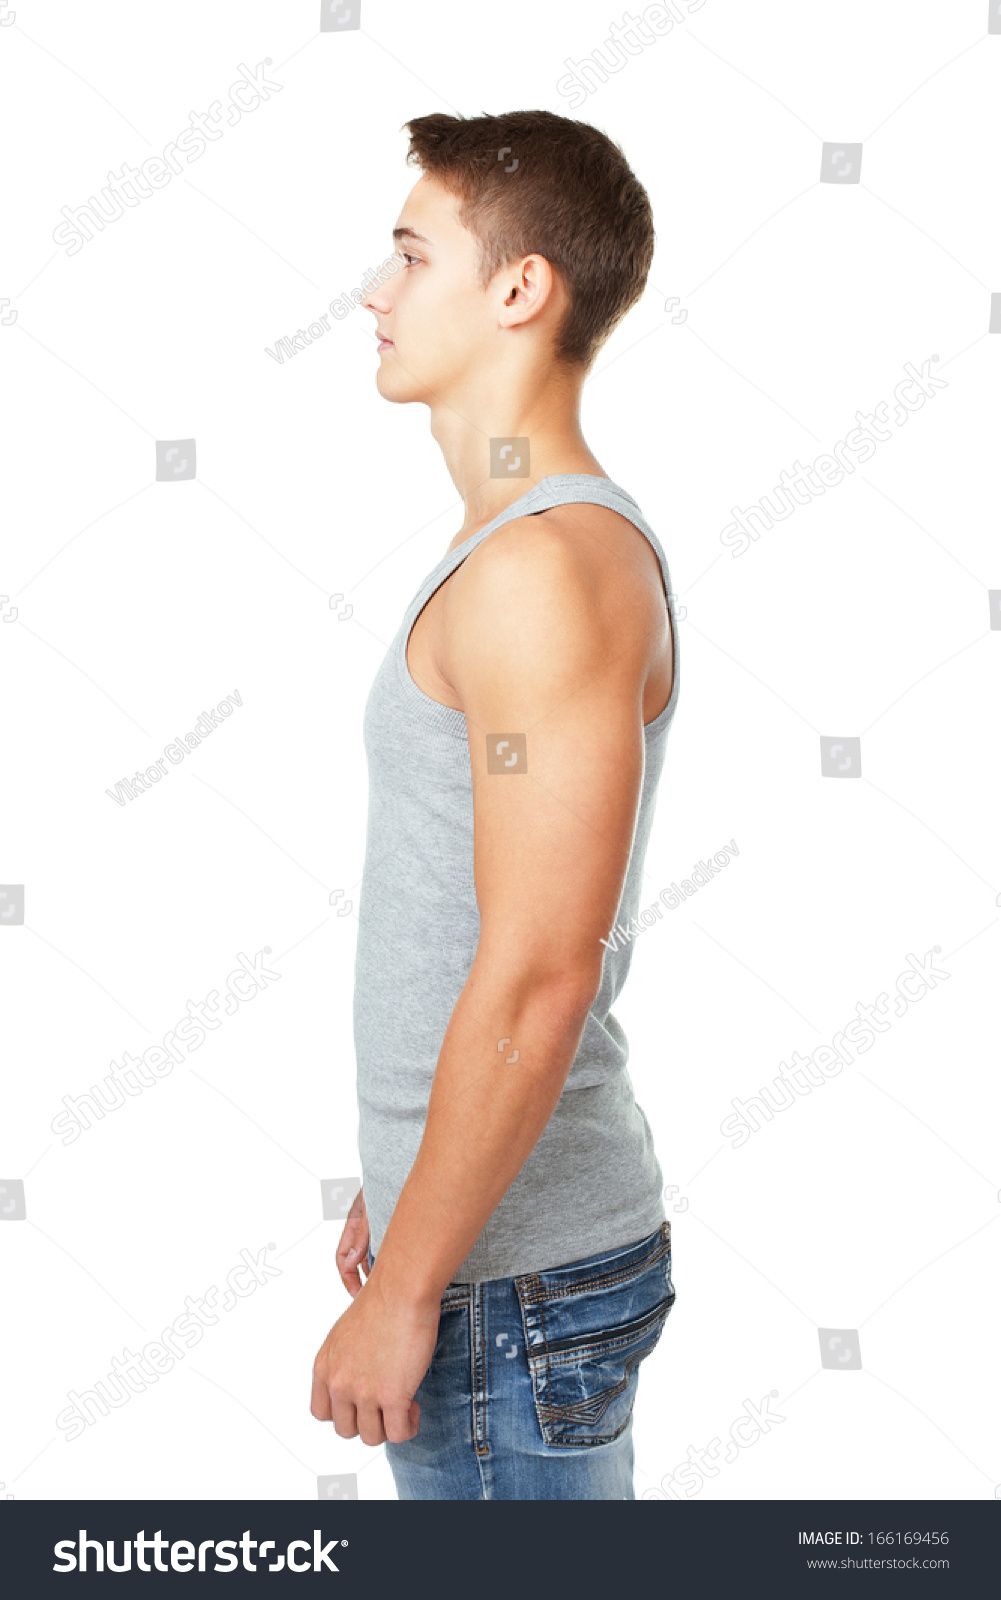 Side View Portrait Young Man Isolated Stock Photo 166169456 - Shutterstock